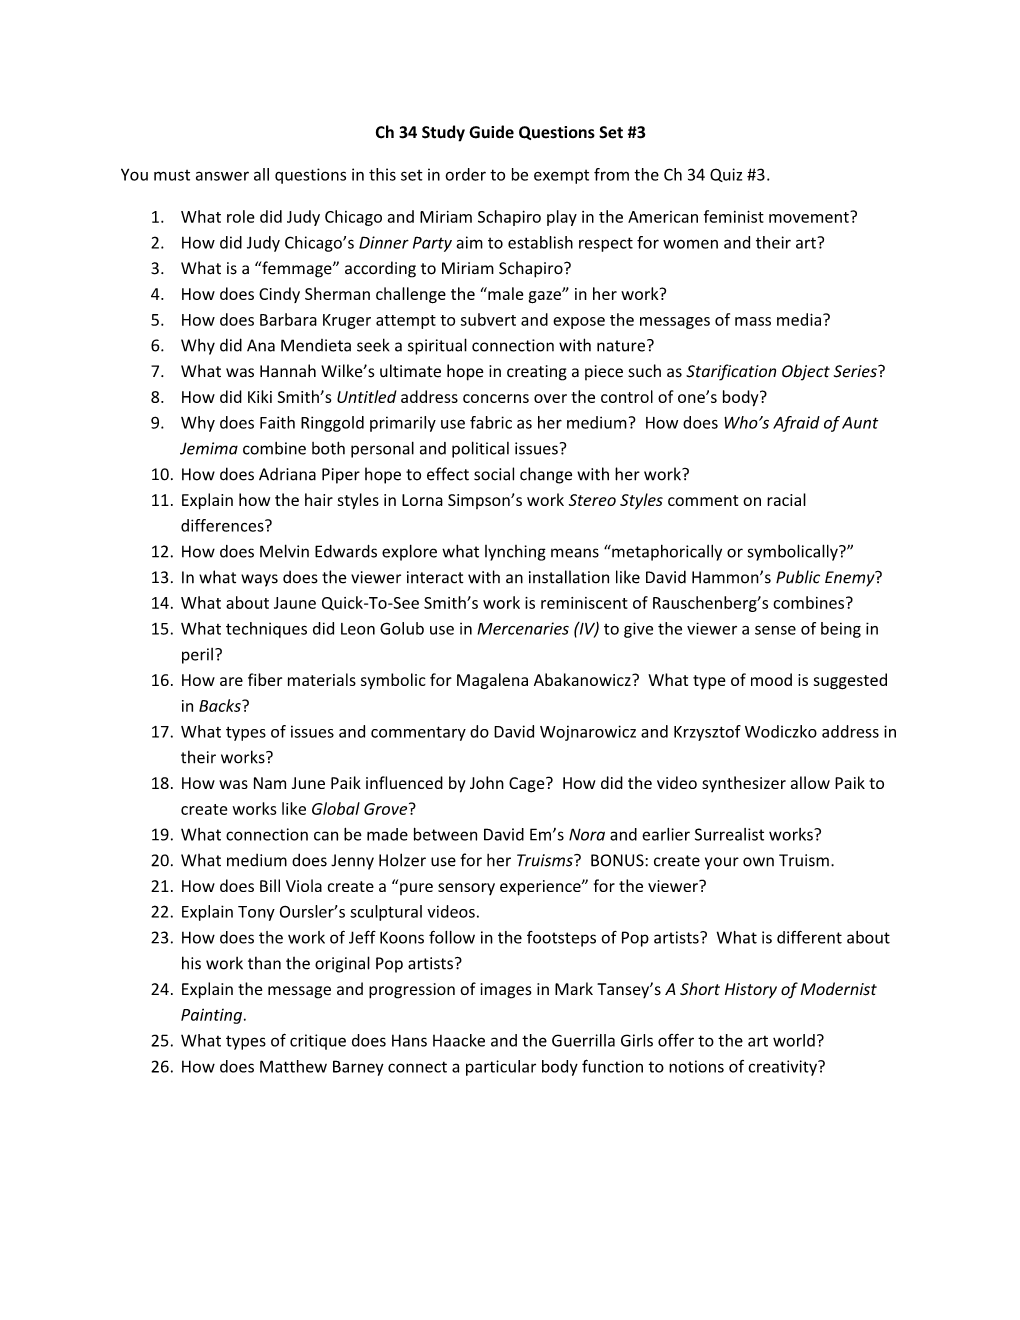 Ch 34 Study Guide Questions Set #3 You Must Answer All Questions in This Set in Order to Be Exempt from the Ch 34 Quiz #3. 1. Wh